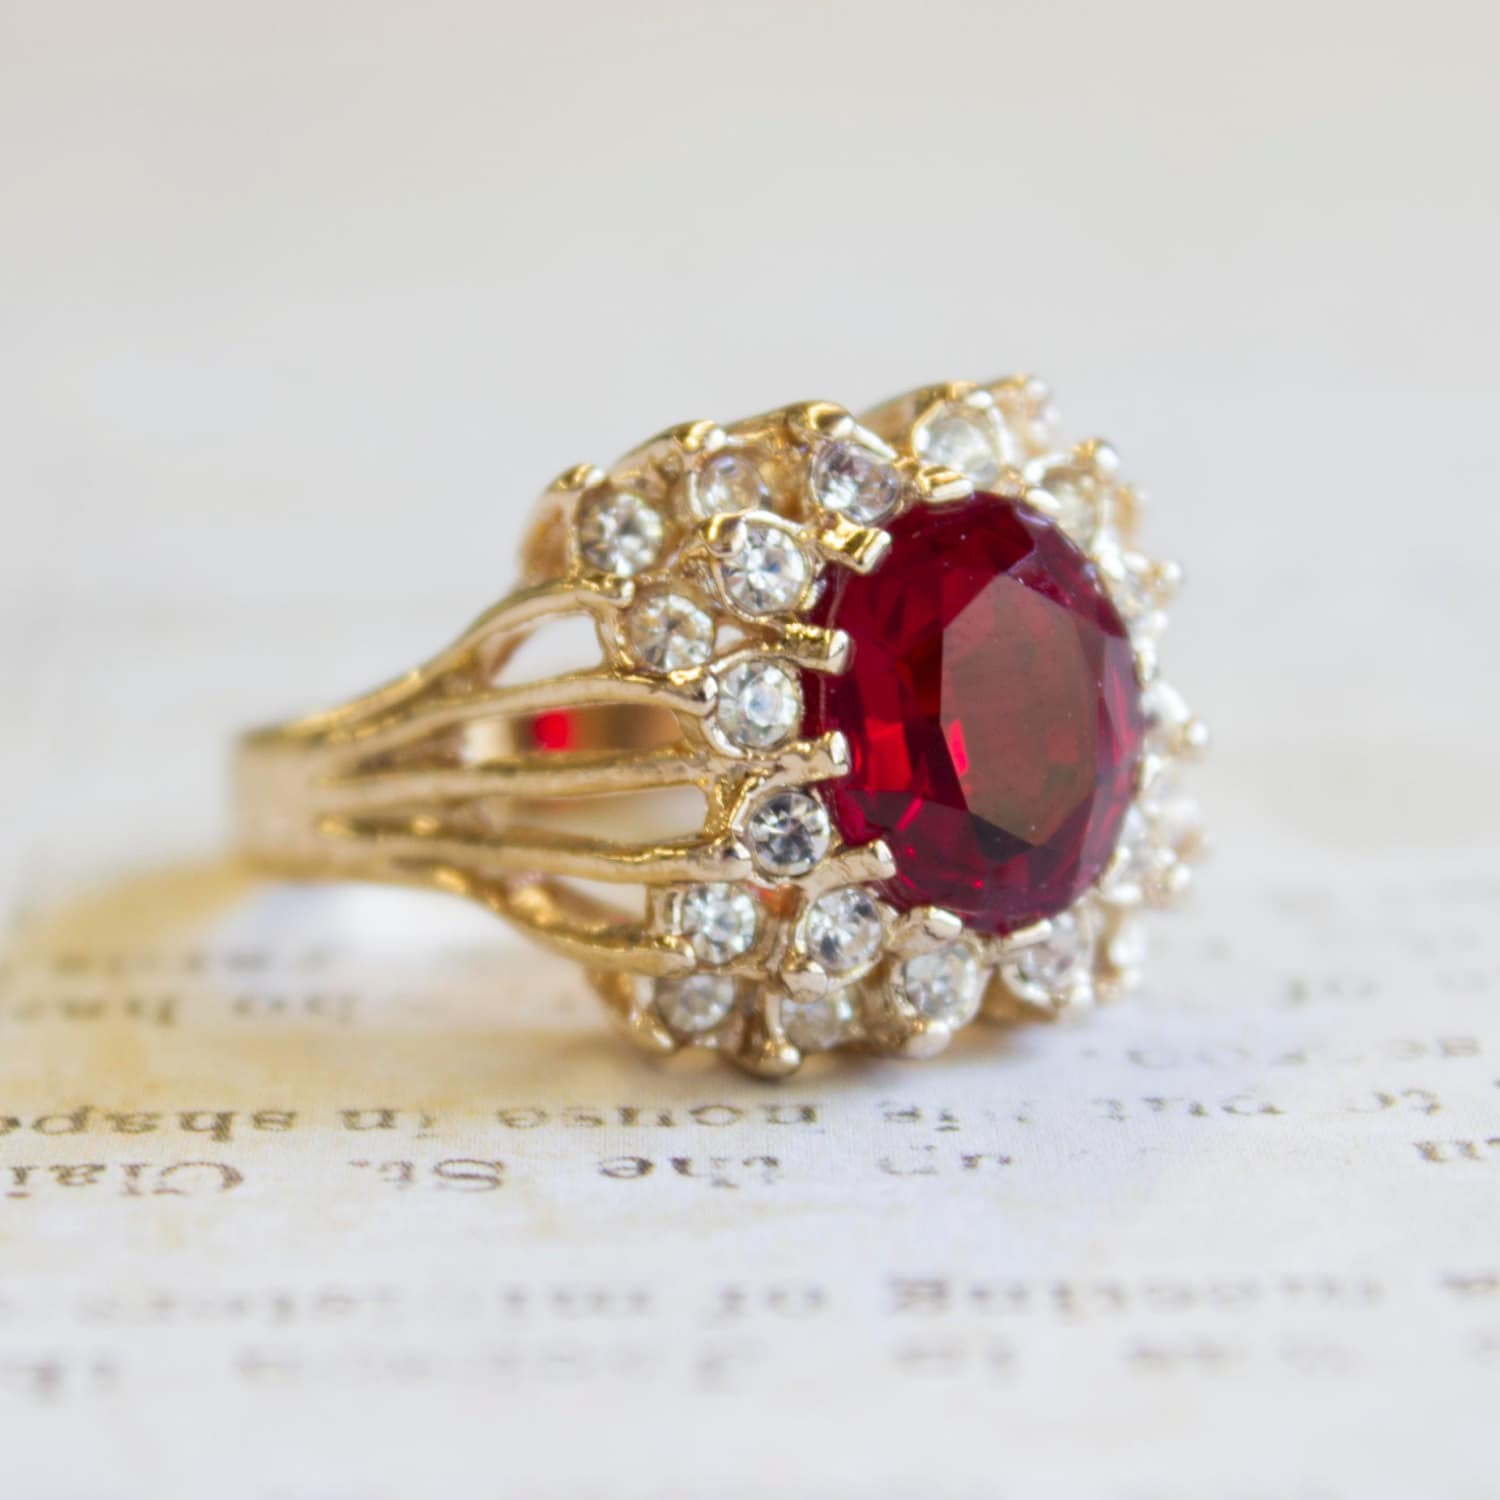 Vintage Ring Ruby and Clear Swarovski Crystal Victorian Style Cocktail Ring 18k Gold  #R199 - Limited Stock - Never Worn